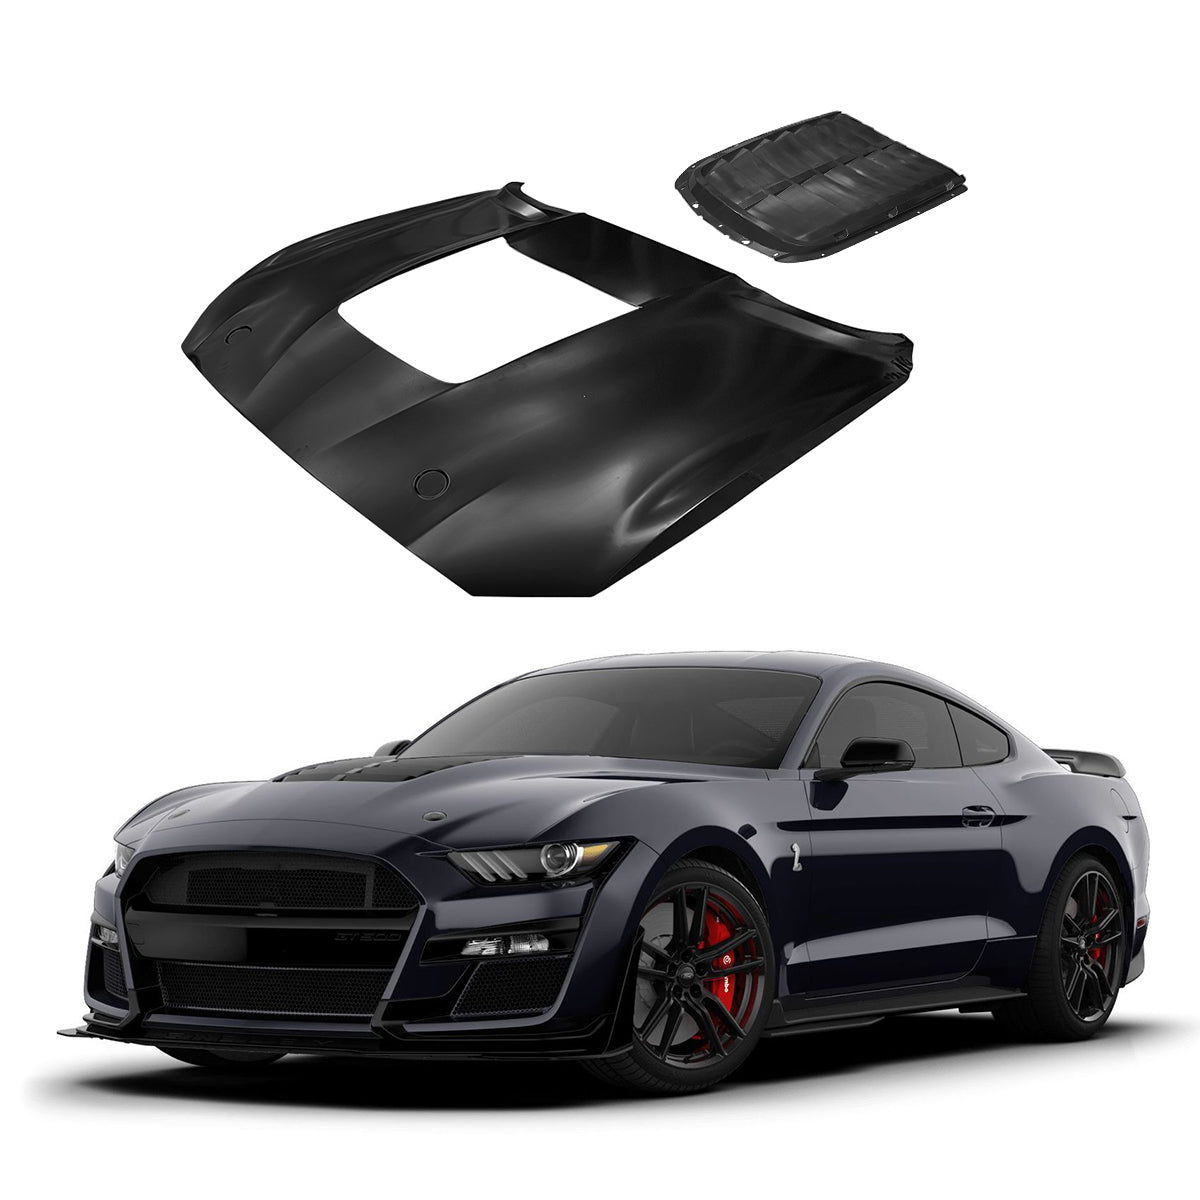 Replacement HOOD, GT500 STYLE, W. SCOOP, 2015-2017 Ford Mustang, (Alum)